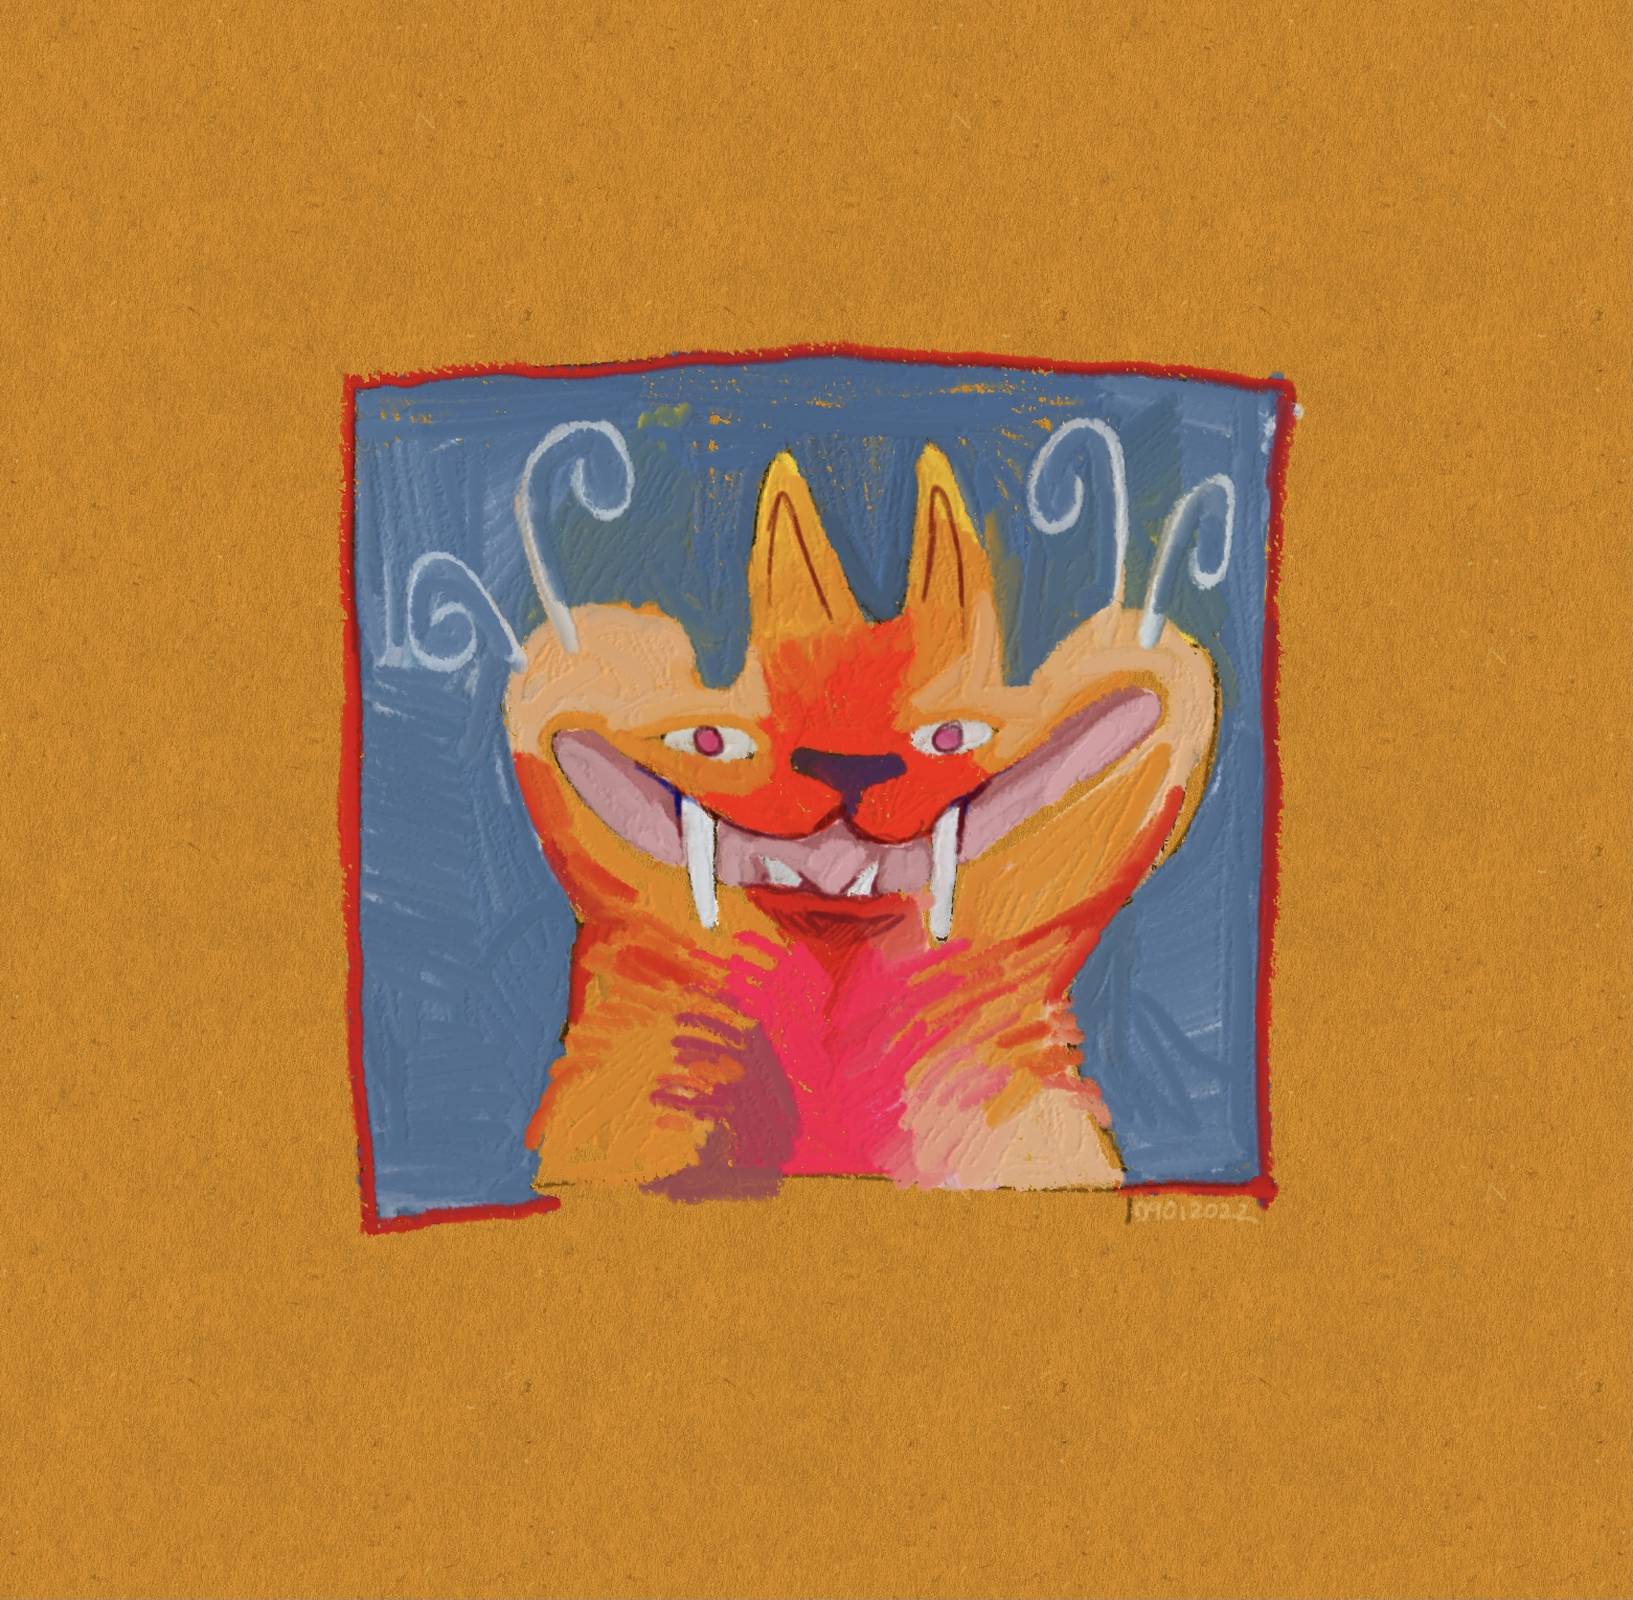 In a little square in the middle is a headshot portrait of a red, yellow, orange colored cat with a big insane grin, big fangs, tiny eyes and swirly whiskers. The portrait has a blue background with a red border. Around the portrait, most of the picture is left a textured, warm orange